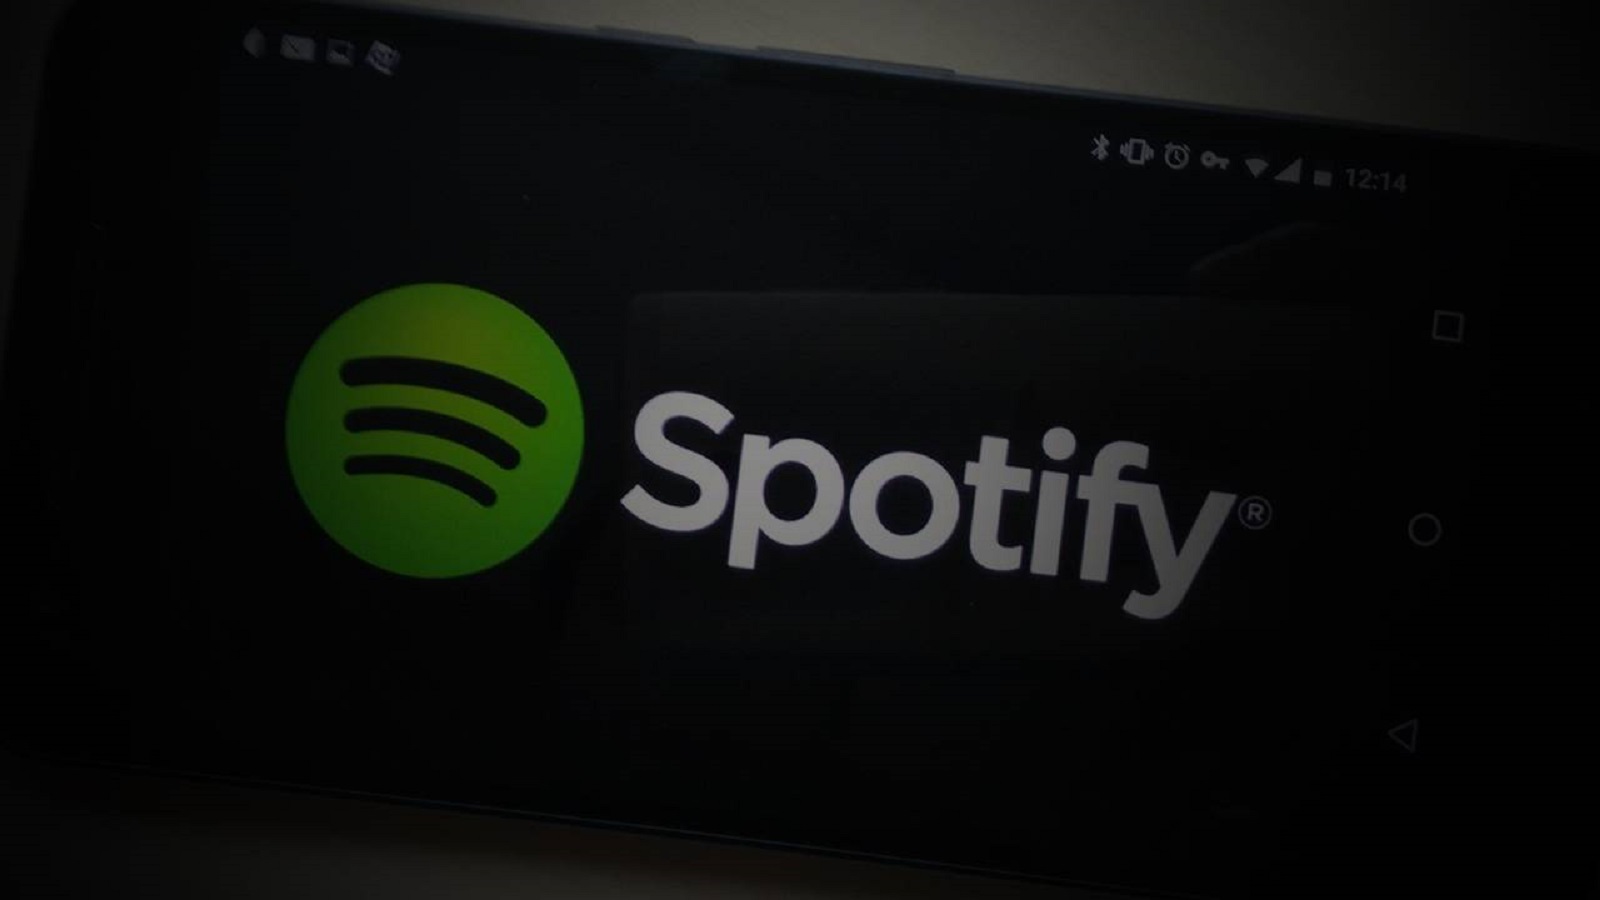 Spotify Is Saying Goodbye to 2016 with a Cheeky Way to Compliment Its Services